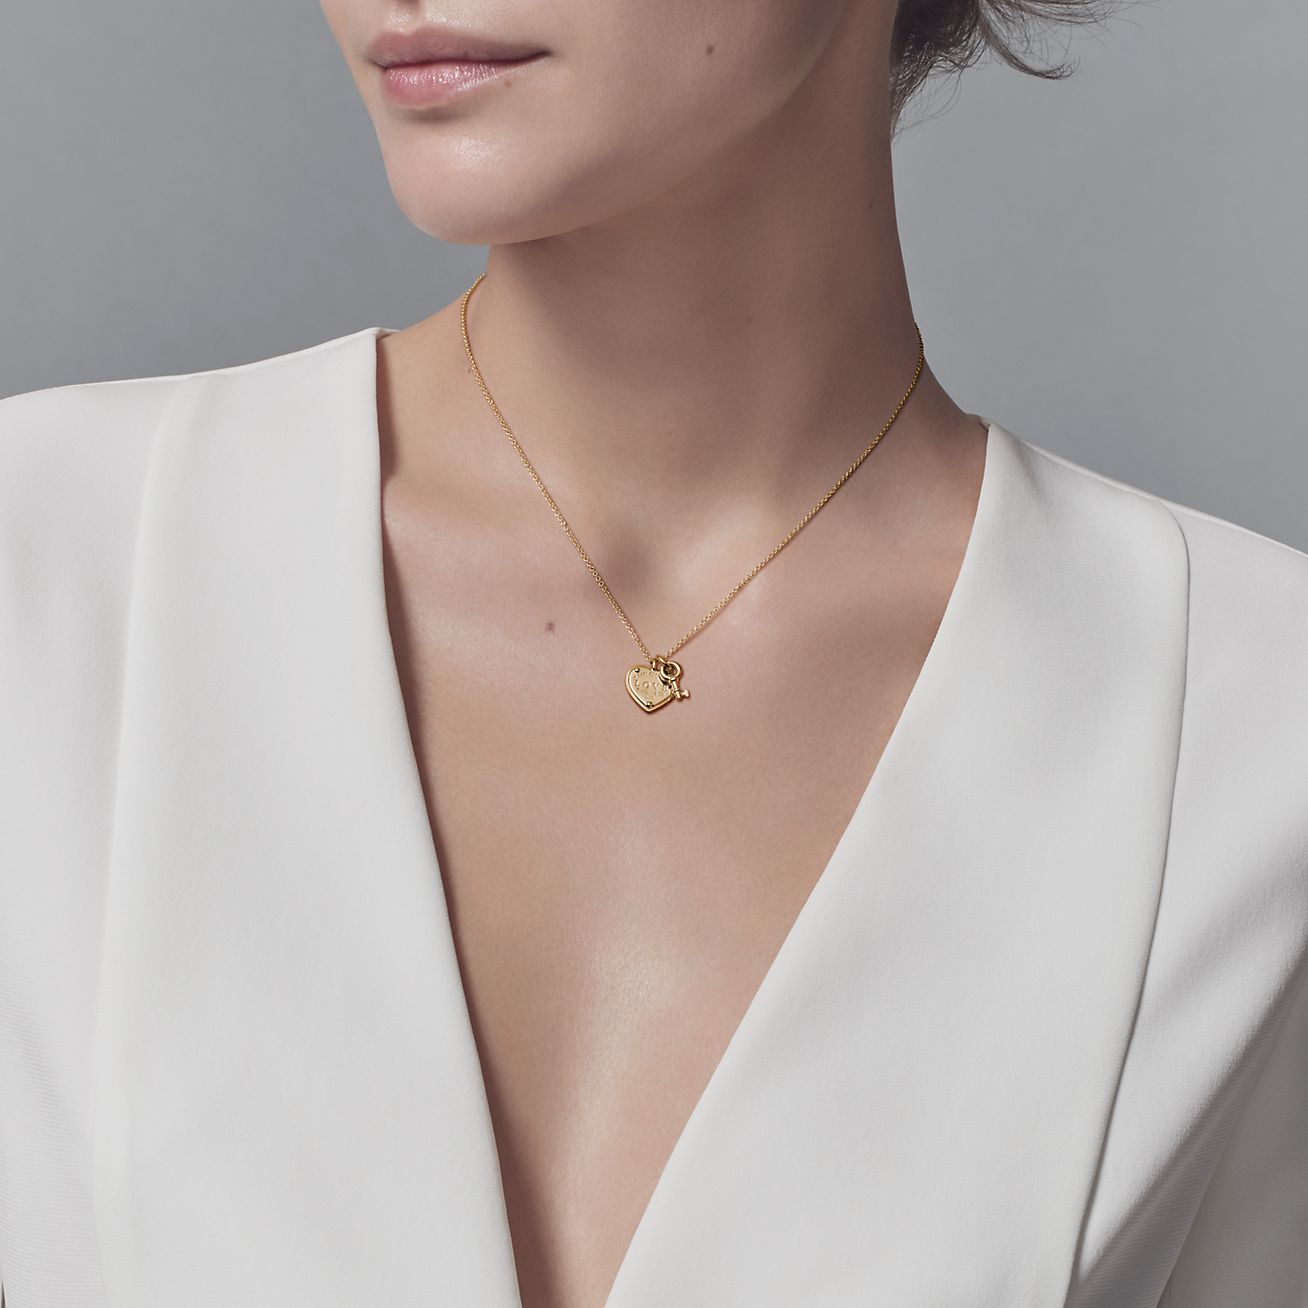 return to tiffany gold necklace